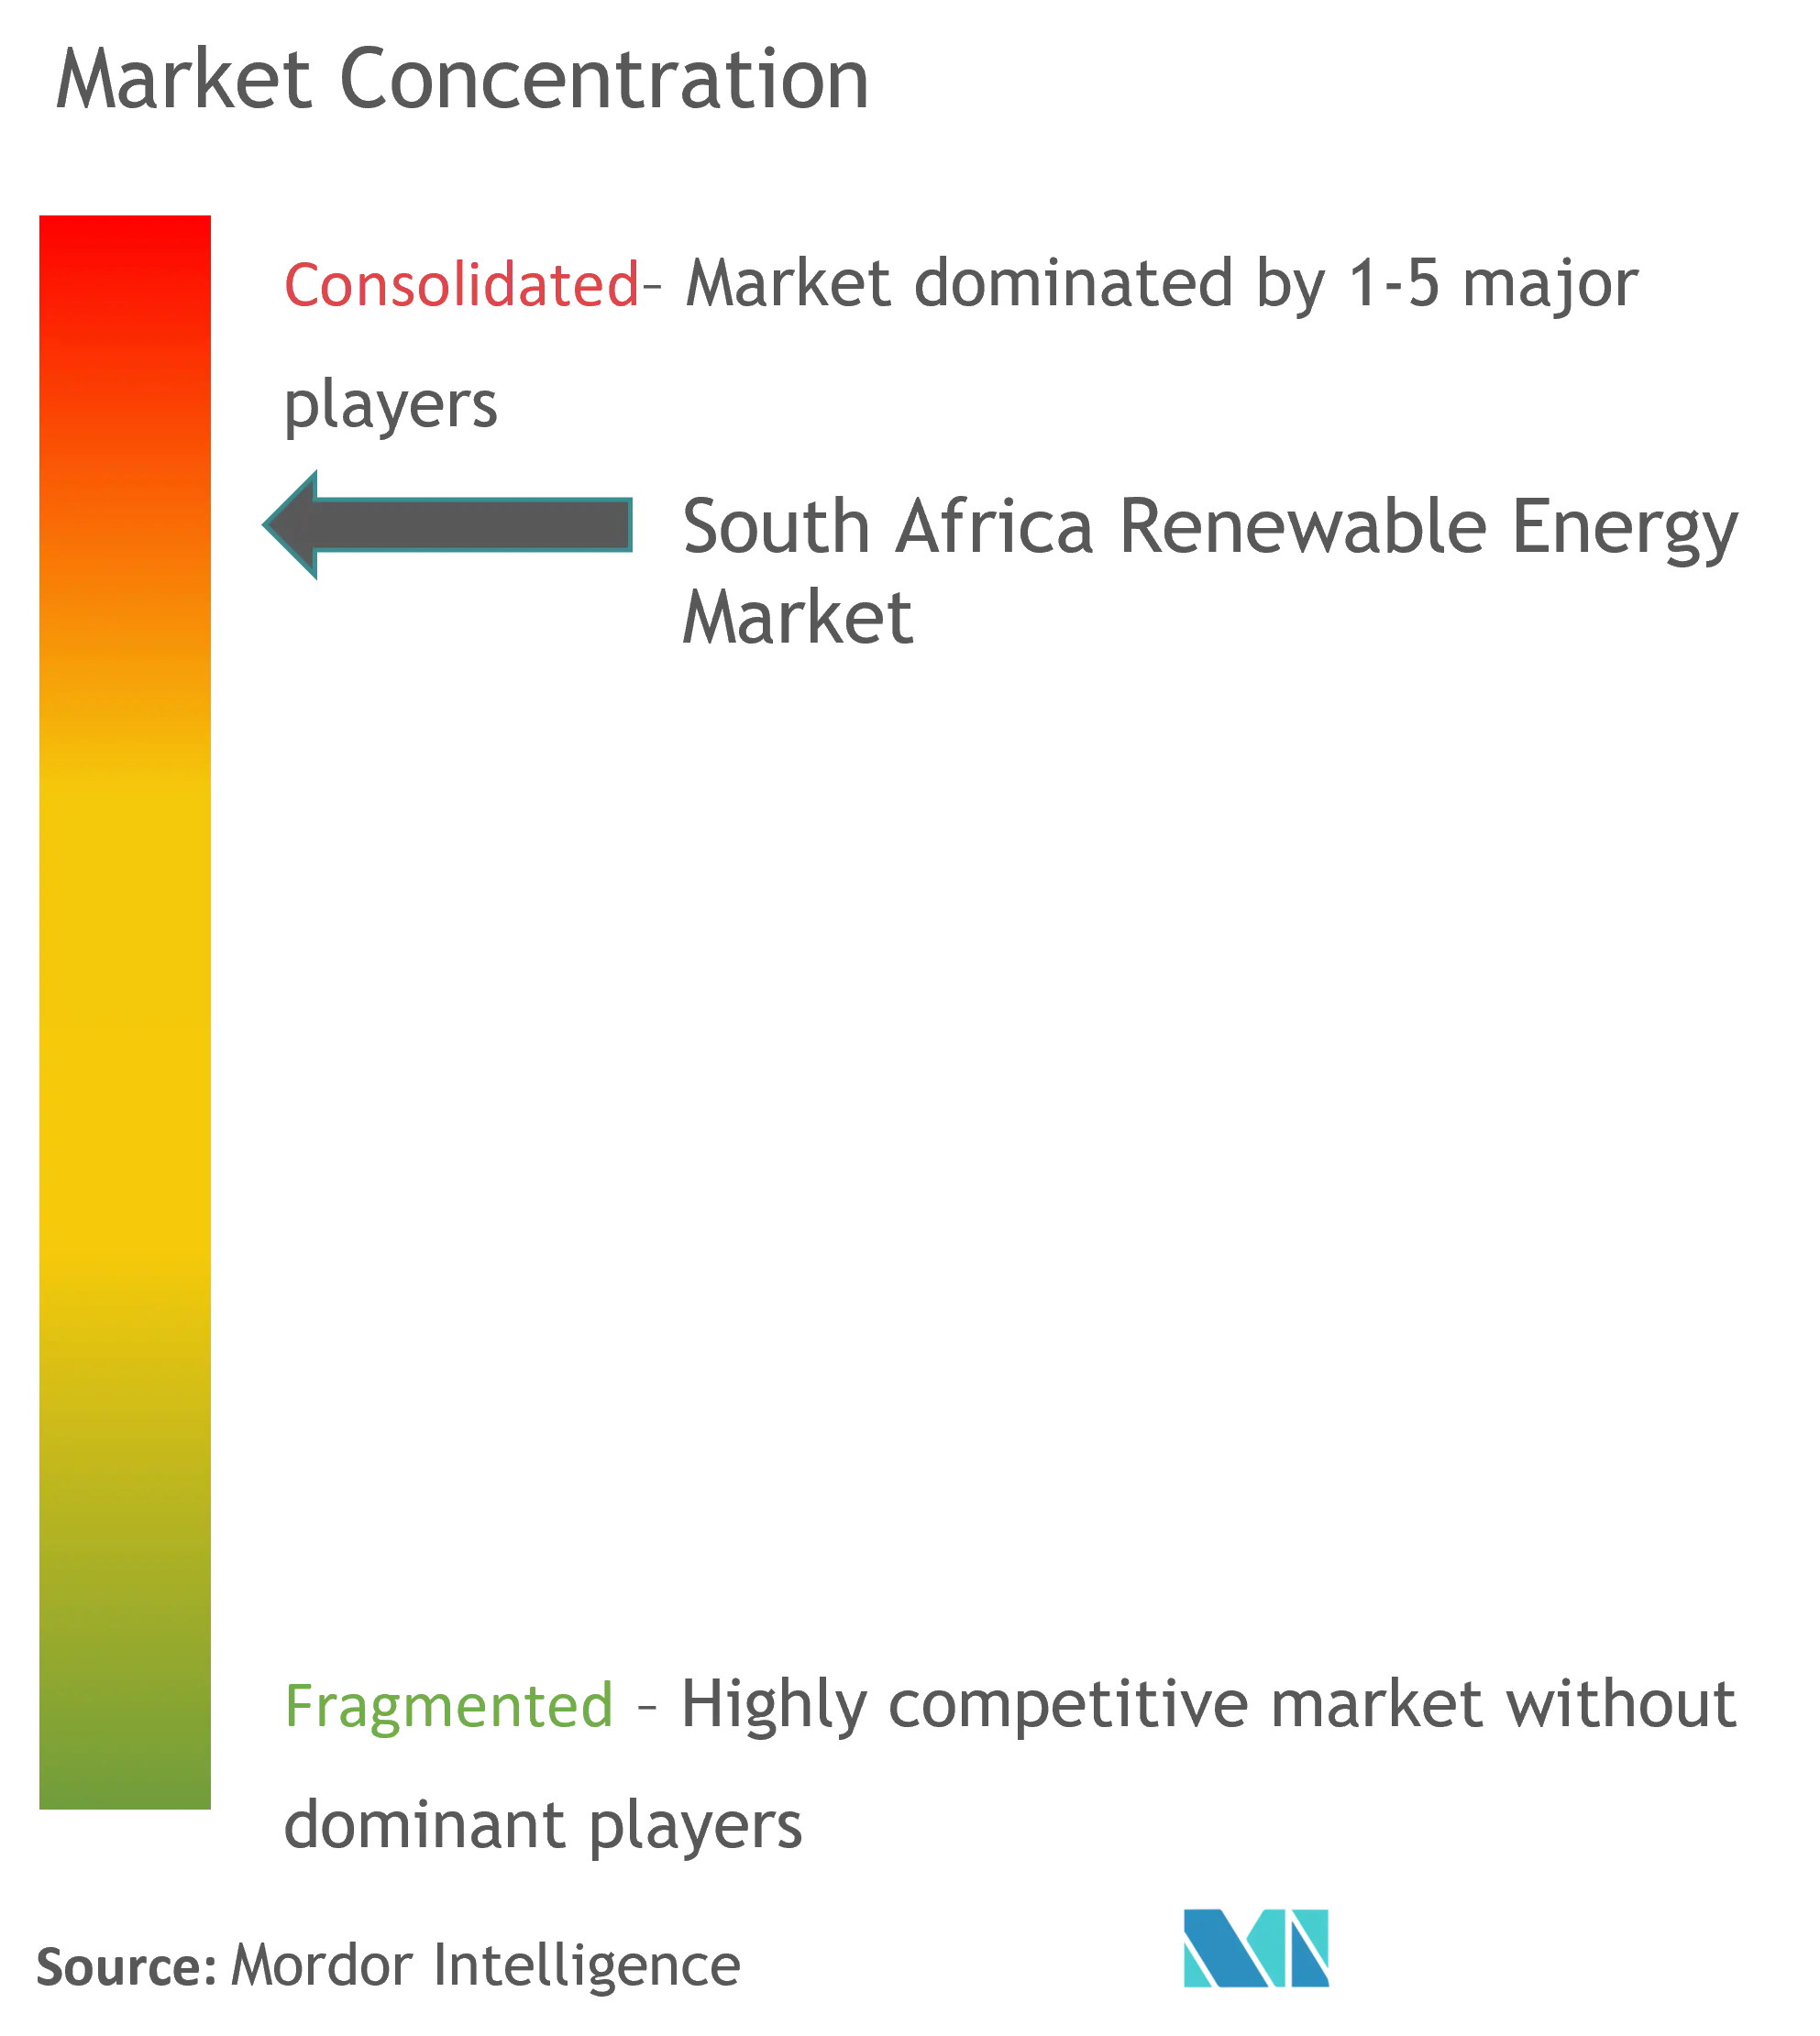 South Africa Renewable Energy Market  Concentration